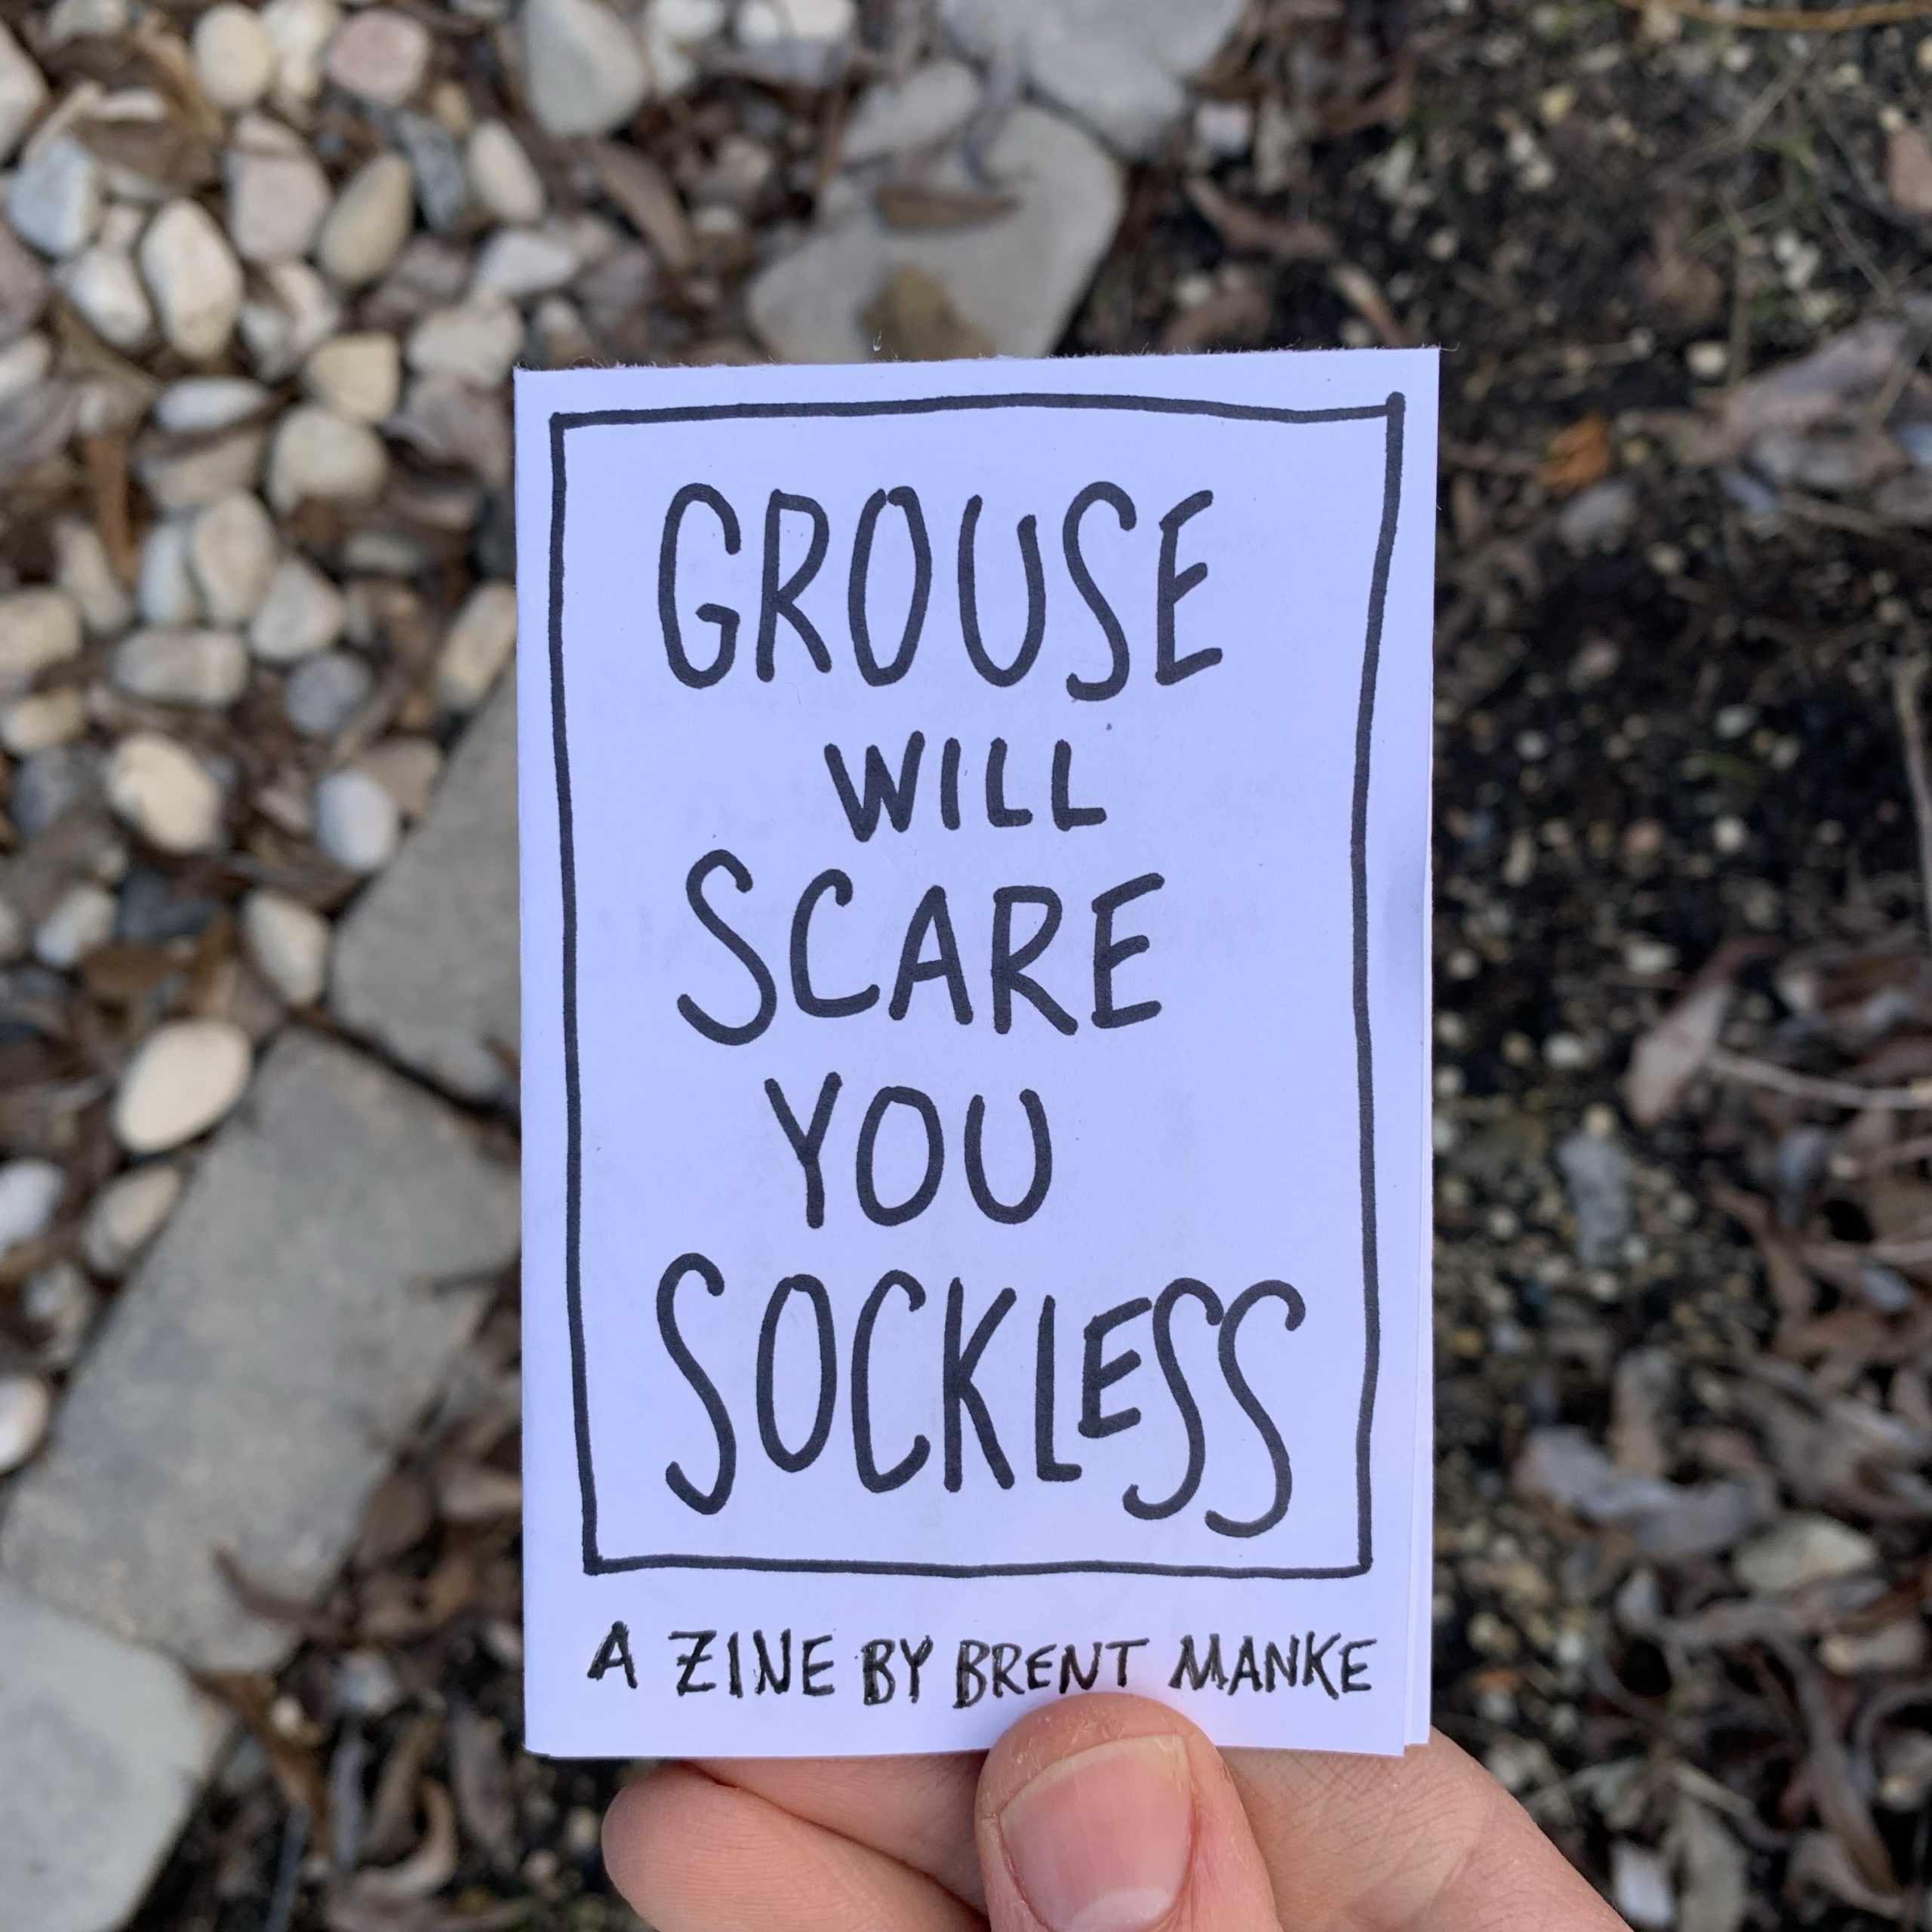 Grouse will scare you sockless pg 1